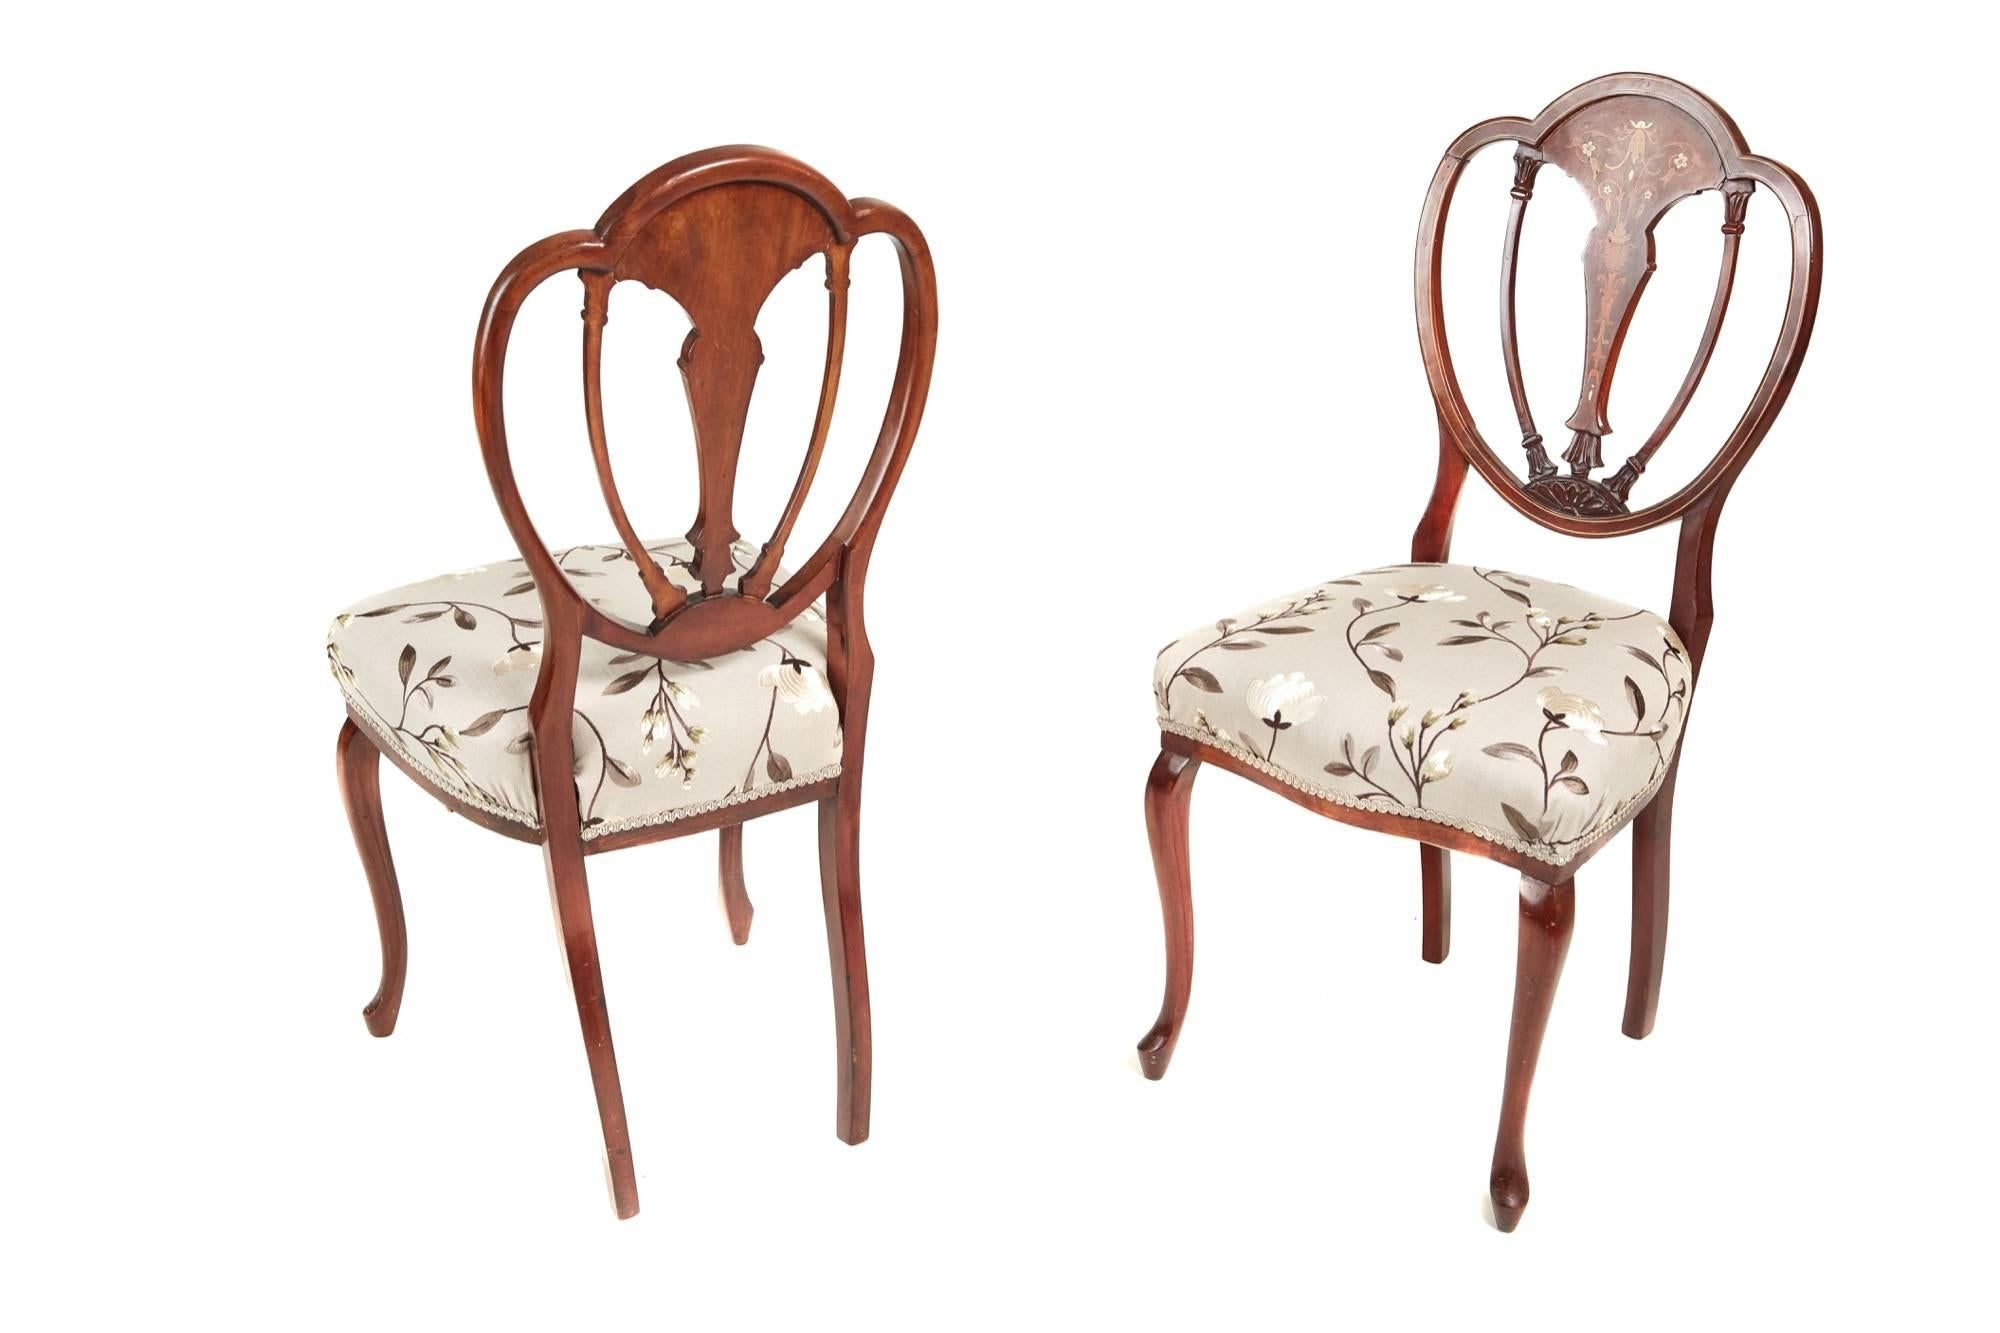 A lovely pair of mahogany inlaid side chairs with a shaped back, marquetry inlaid centre splat, newly re-upholstered seats in a quality fabric, supported by cabriole legs to the front out swept back legs.

Fantastic colour and condition.